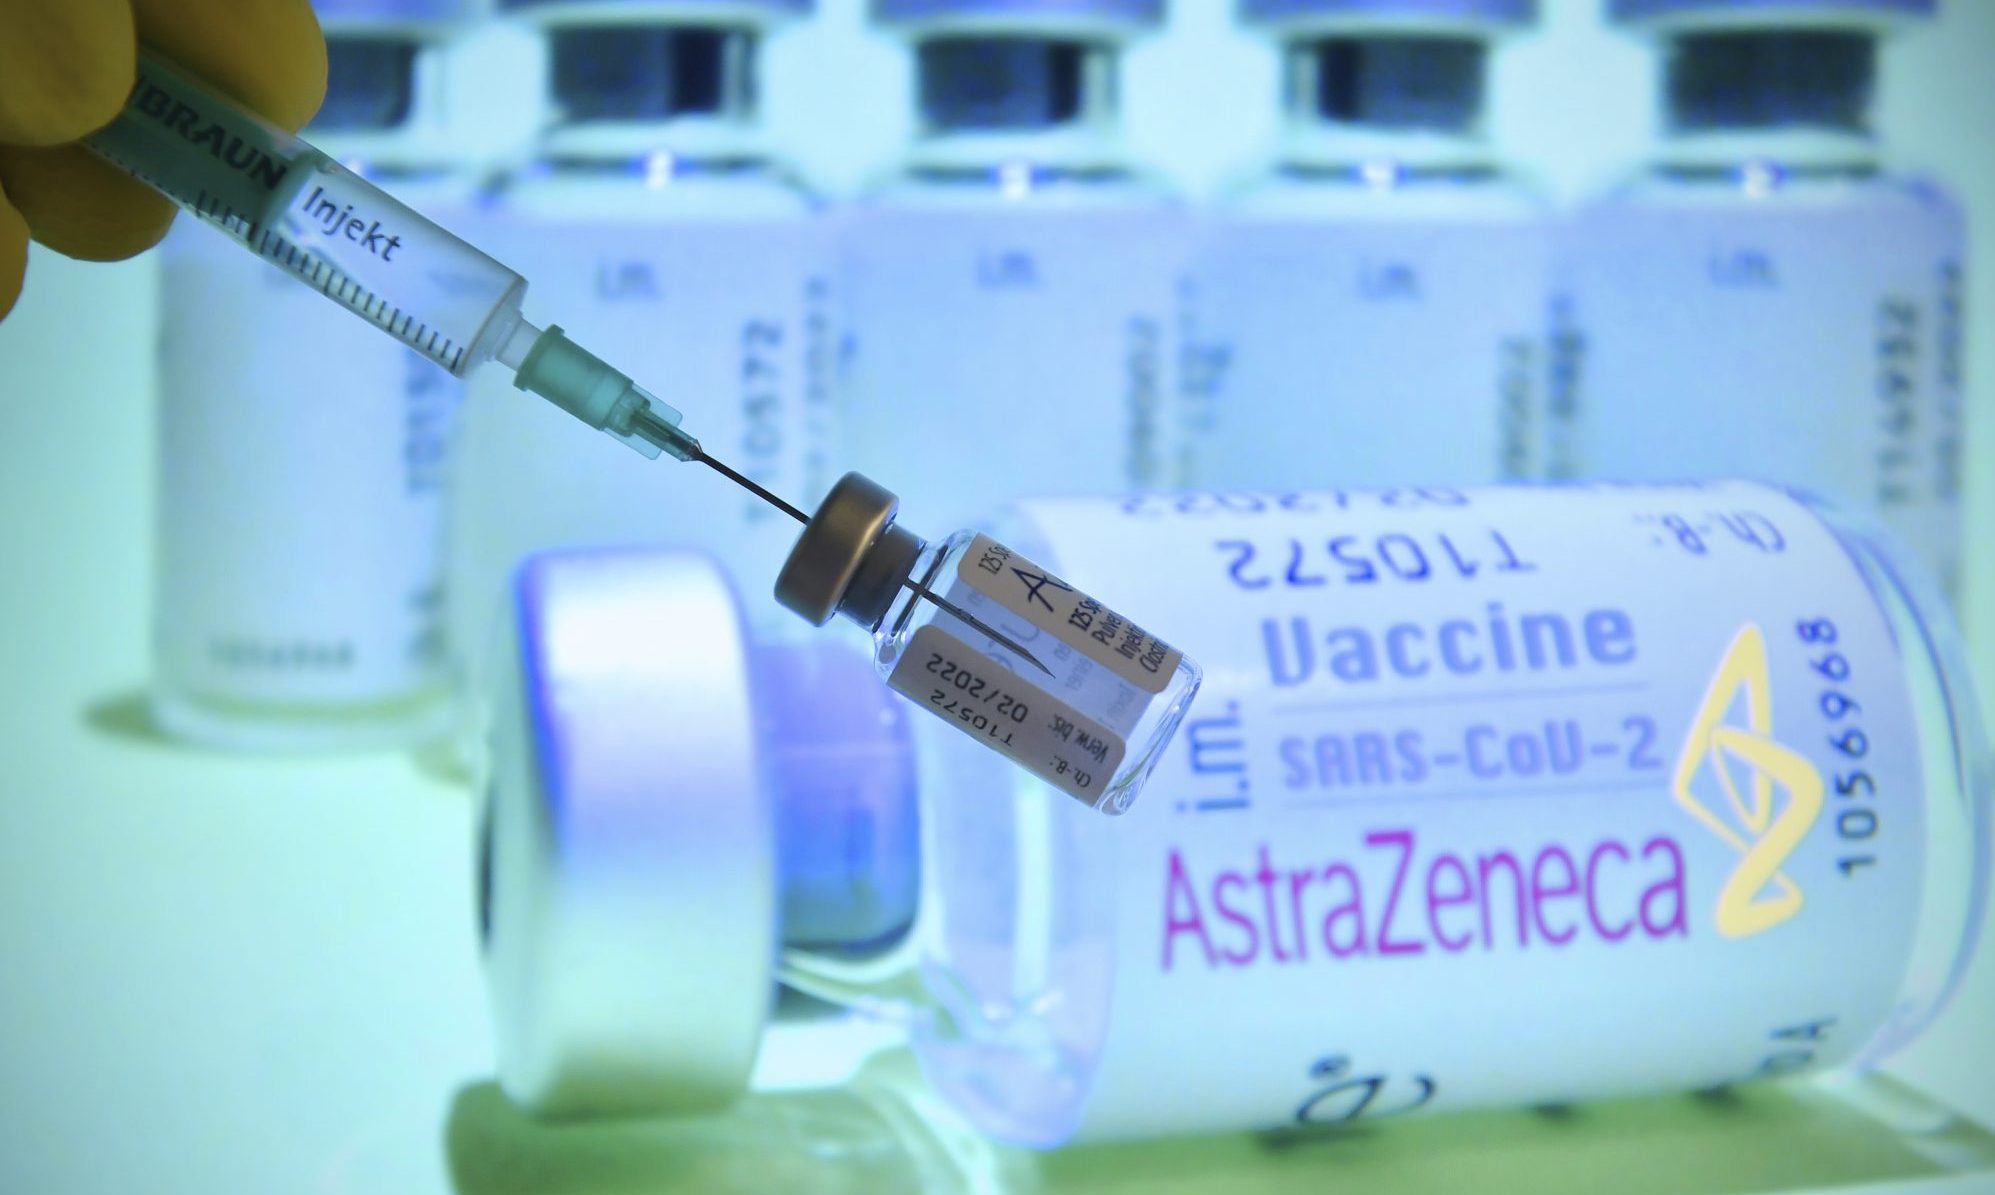 The Oxford Astrazeneca Vaccine Will Be Tested In A New Trial After Questions Over Its Data Mit Technology Review